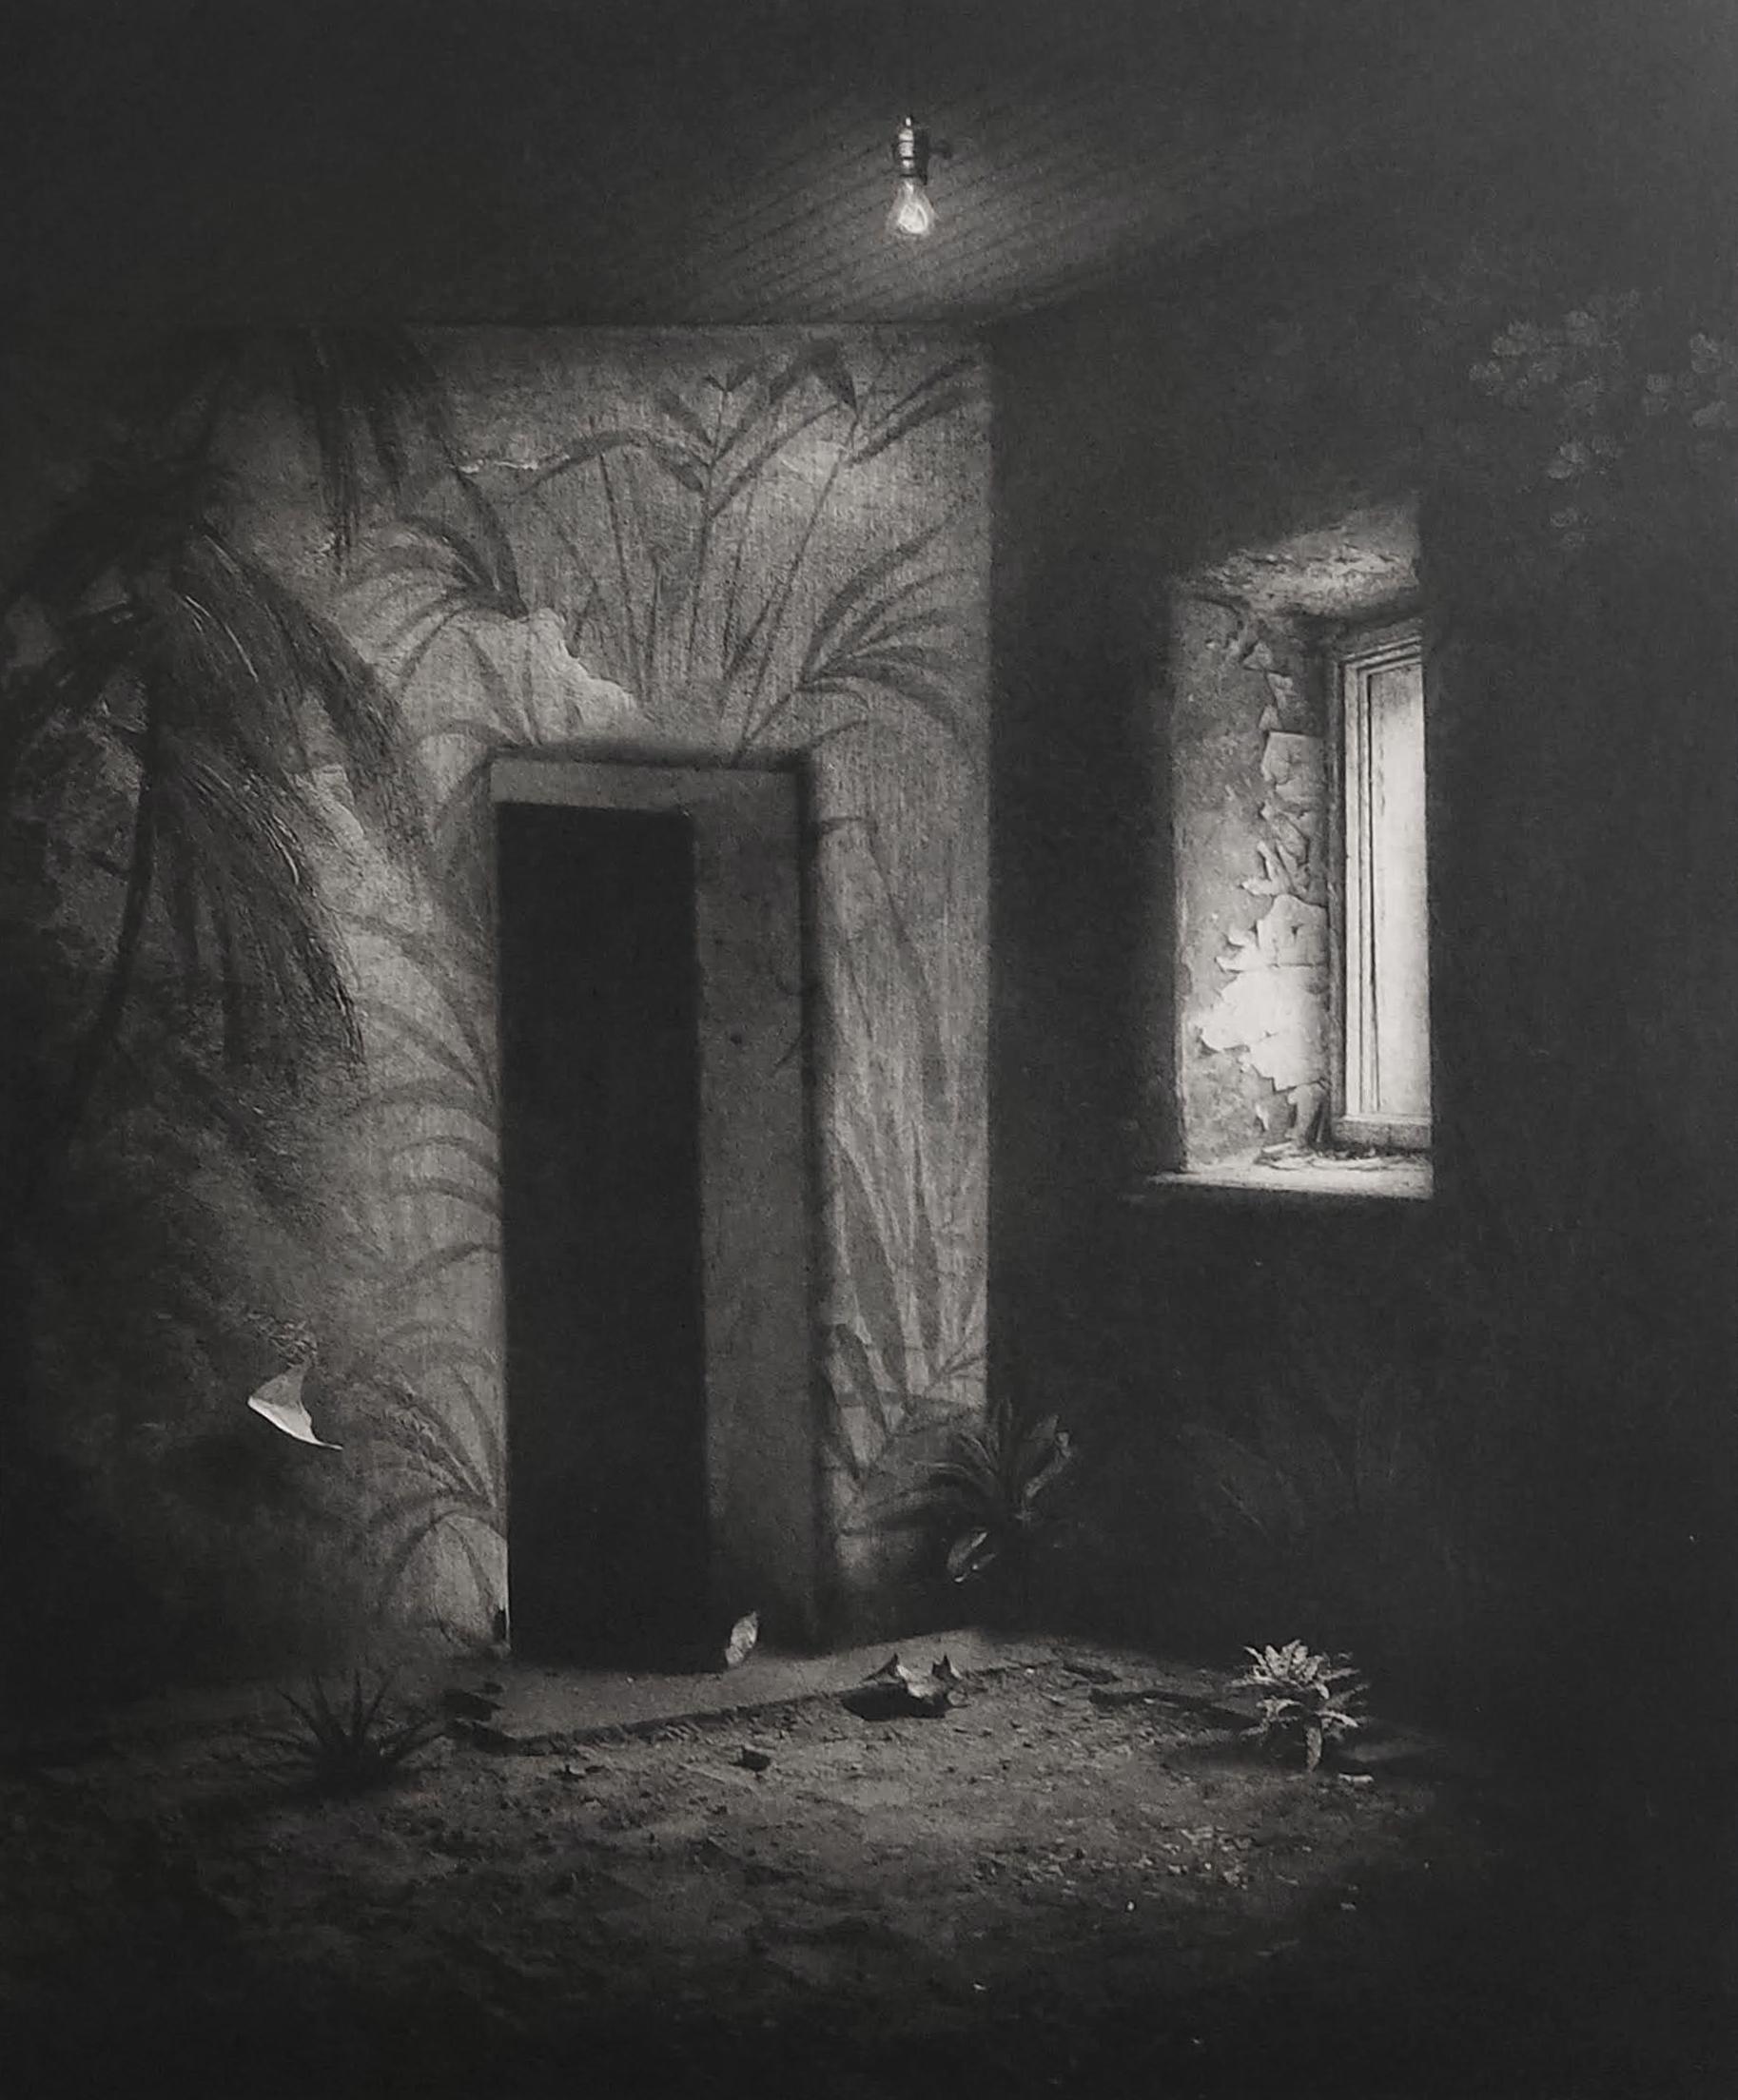 Suzanne Moxhay Black and White Photograph - Room with Palm Wallpaper, Interior Photography, Photomontage, Gravure, Urbex